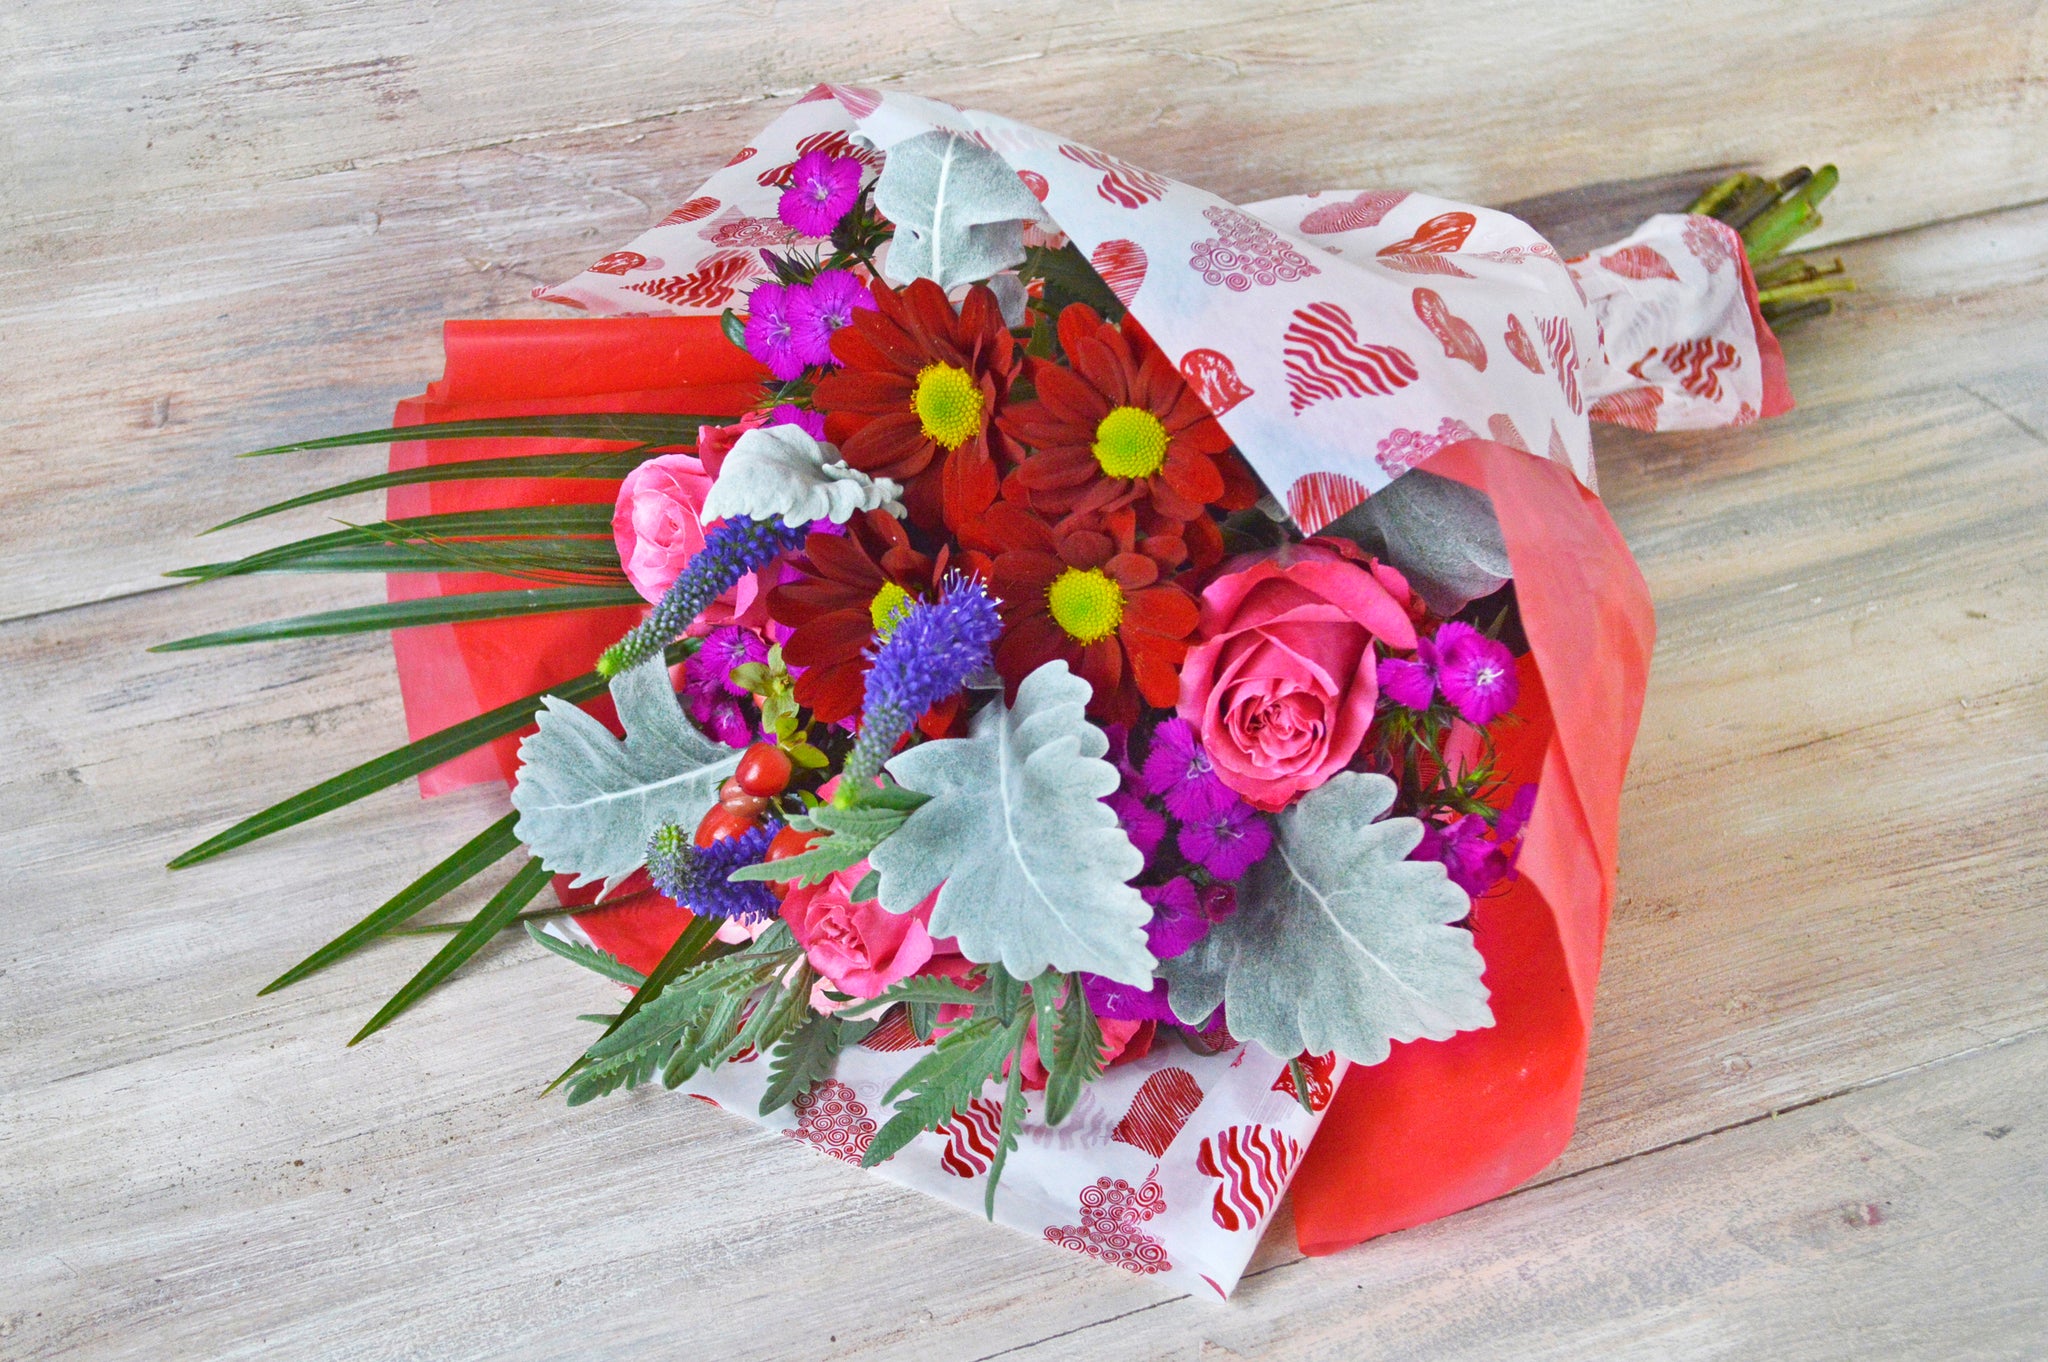 Floral bouquet designed to celebrate love, composed of premium roses, daisies, veronica, dianthus and foliage.